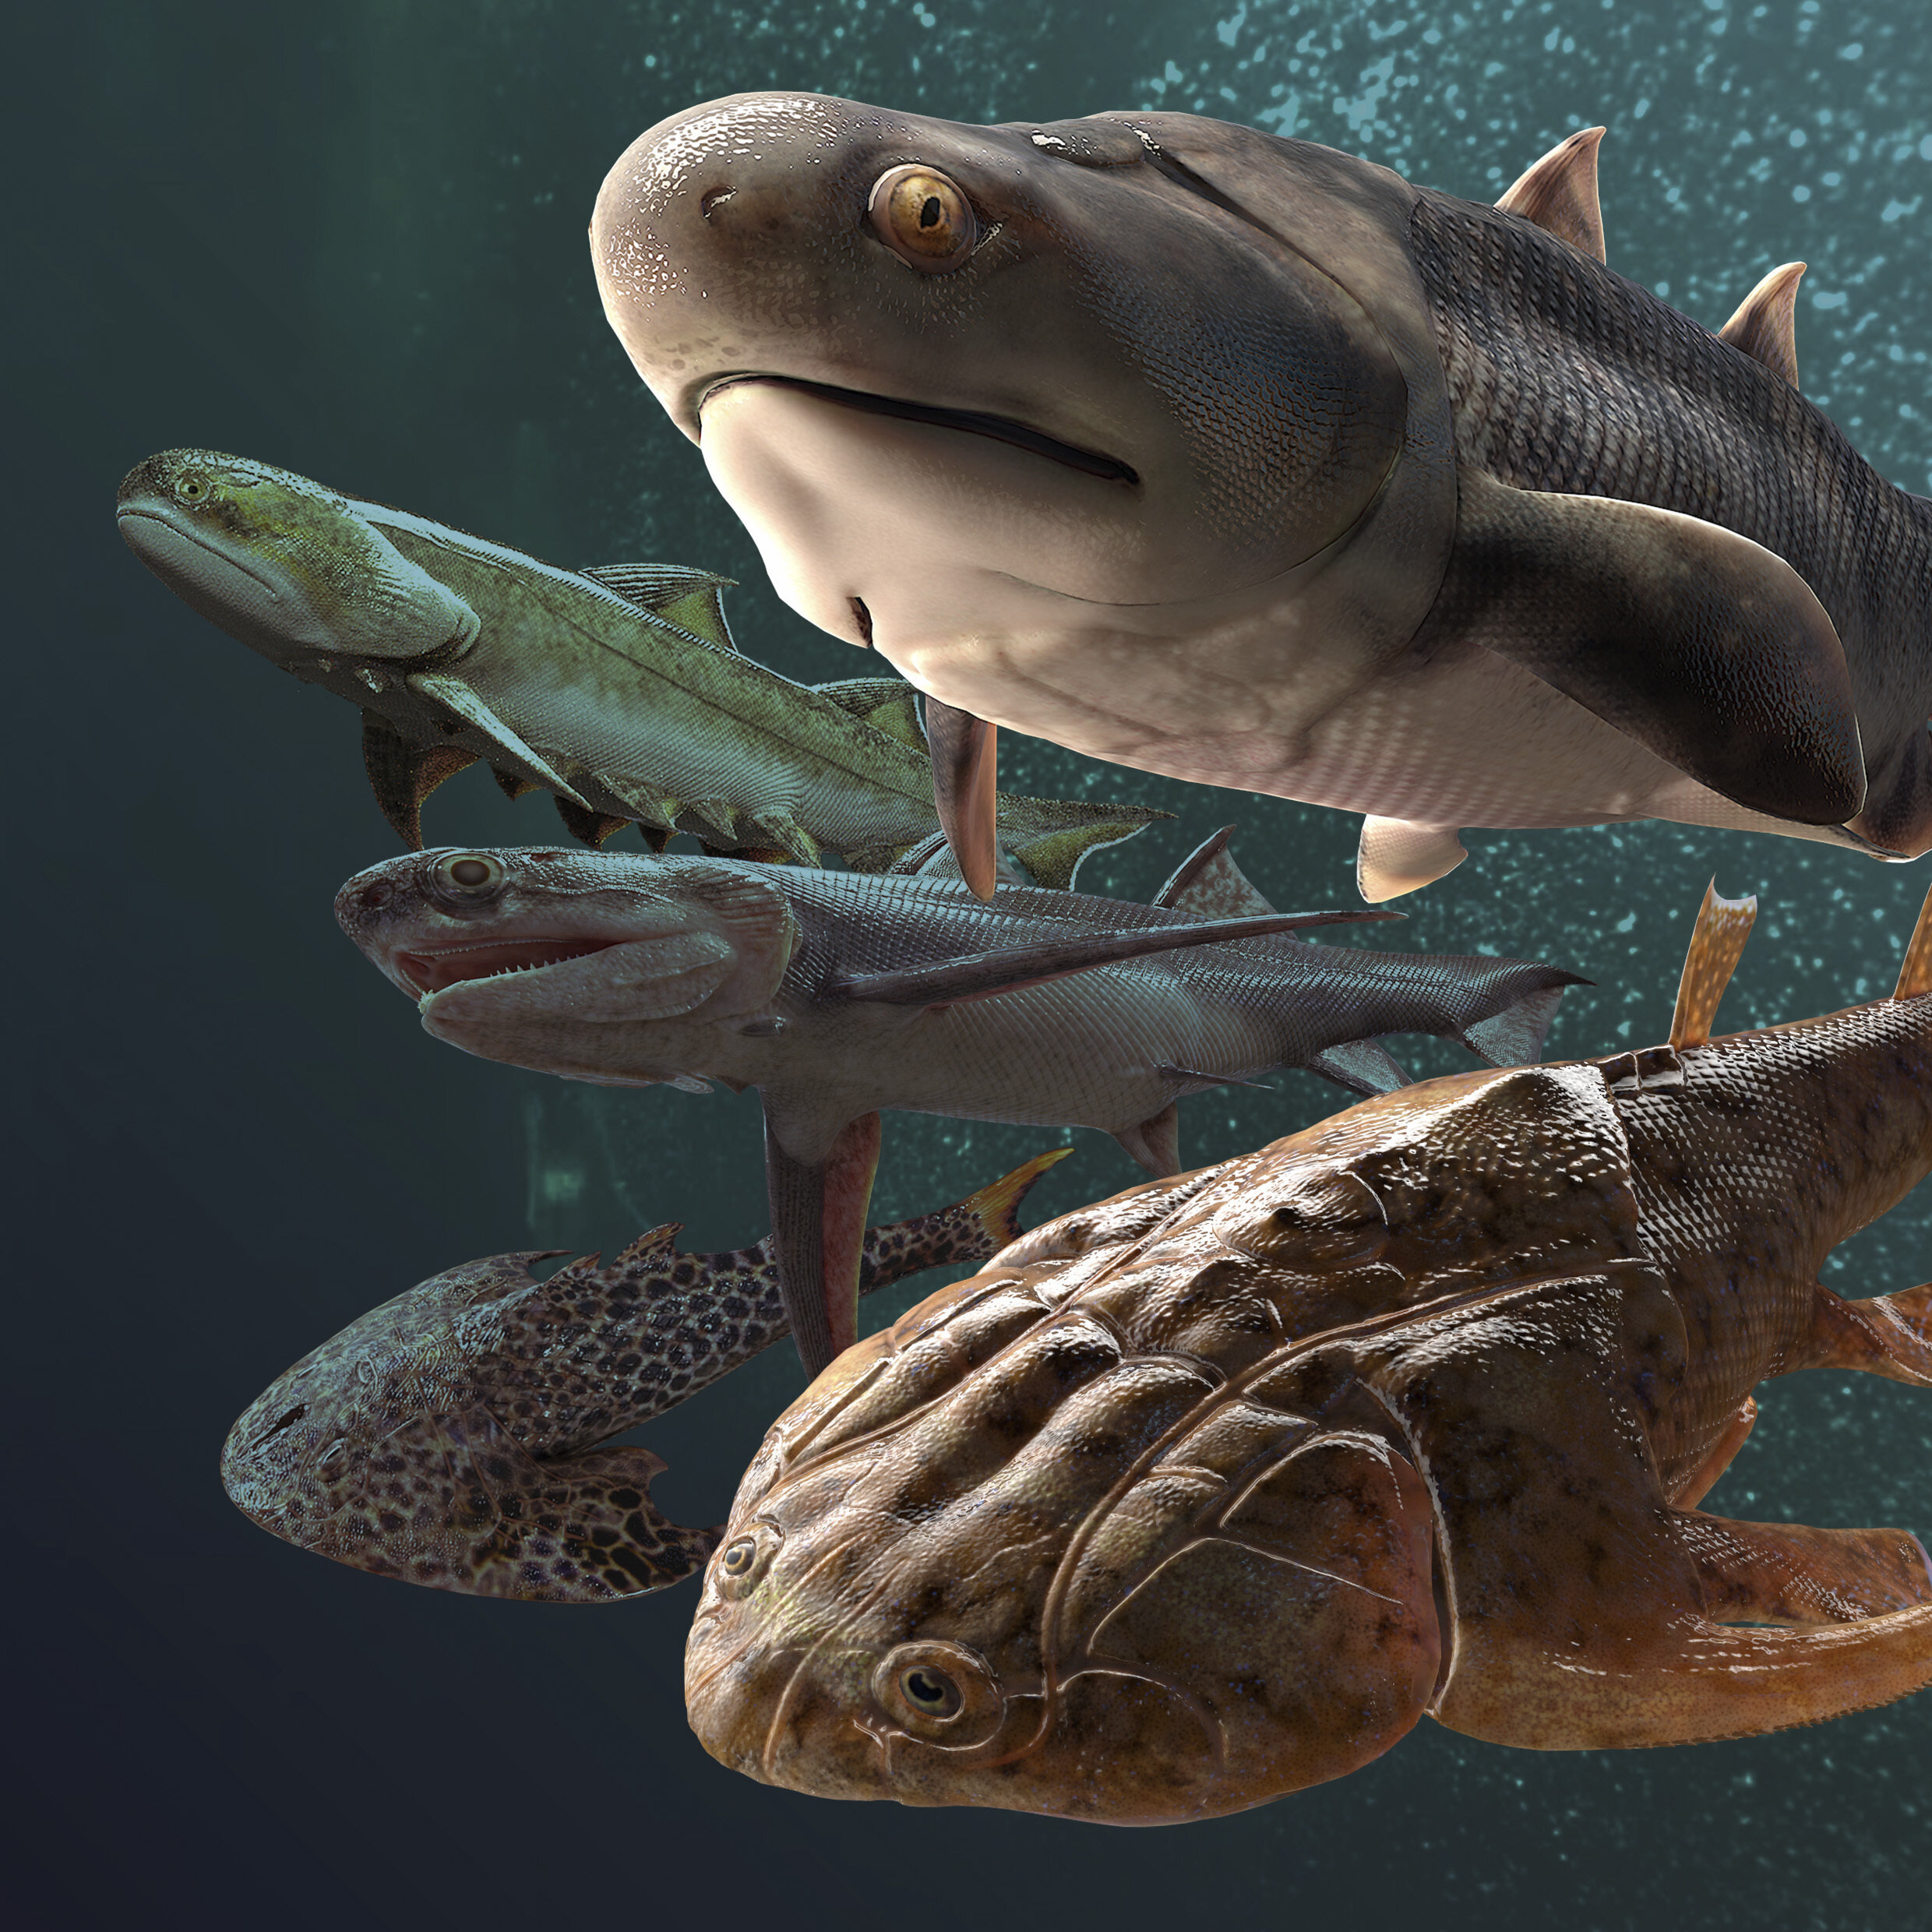 #Fish fossil catch from China includes oldest teeth ever